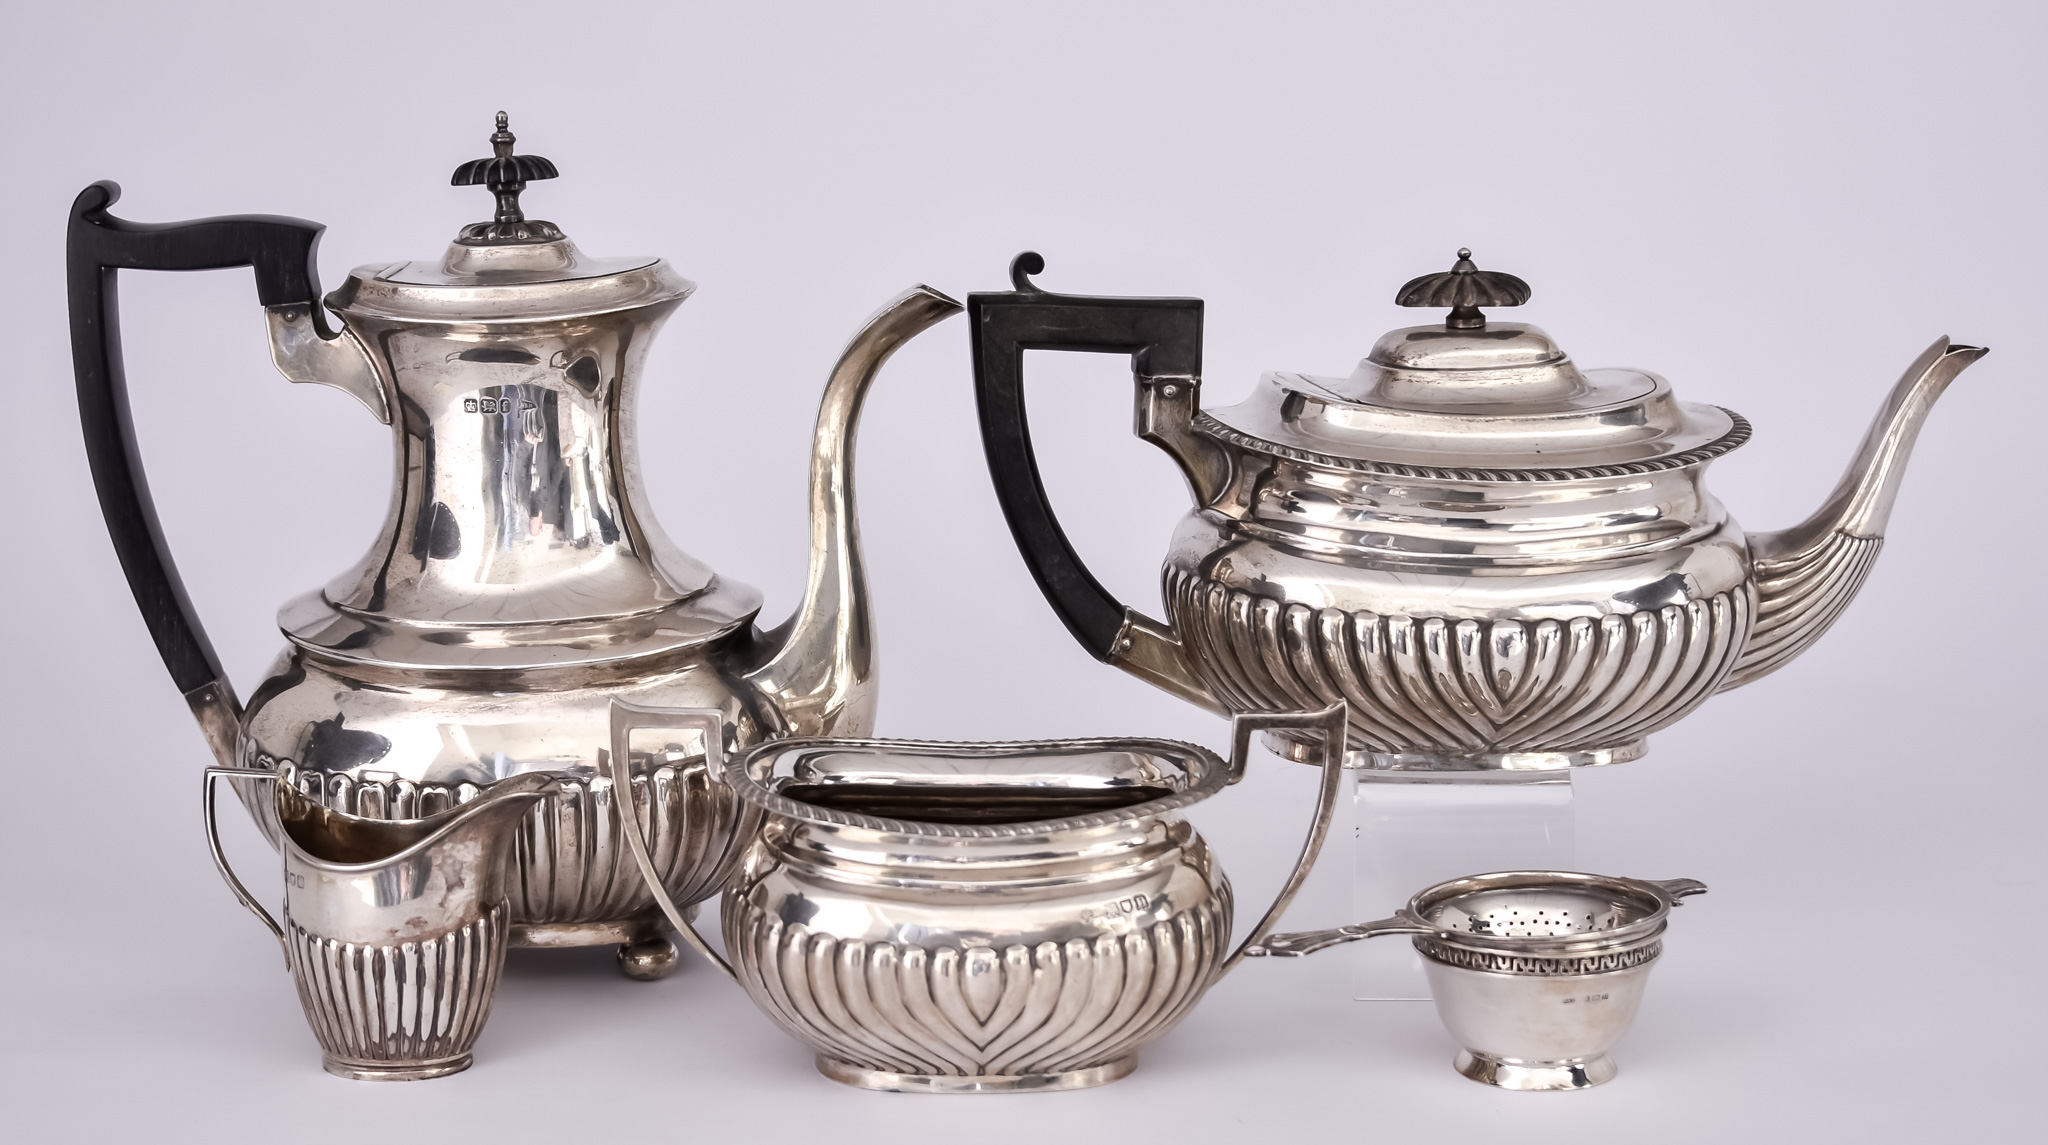 A Victorian/ Edward VII Harlequin Silver Tea and Coffee Set and a Tea Strainer, the set by various